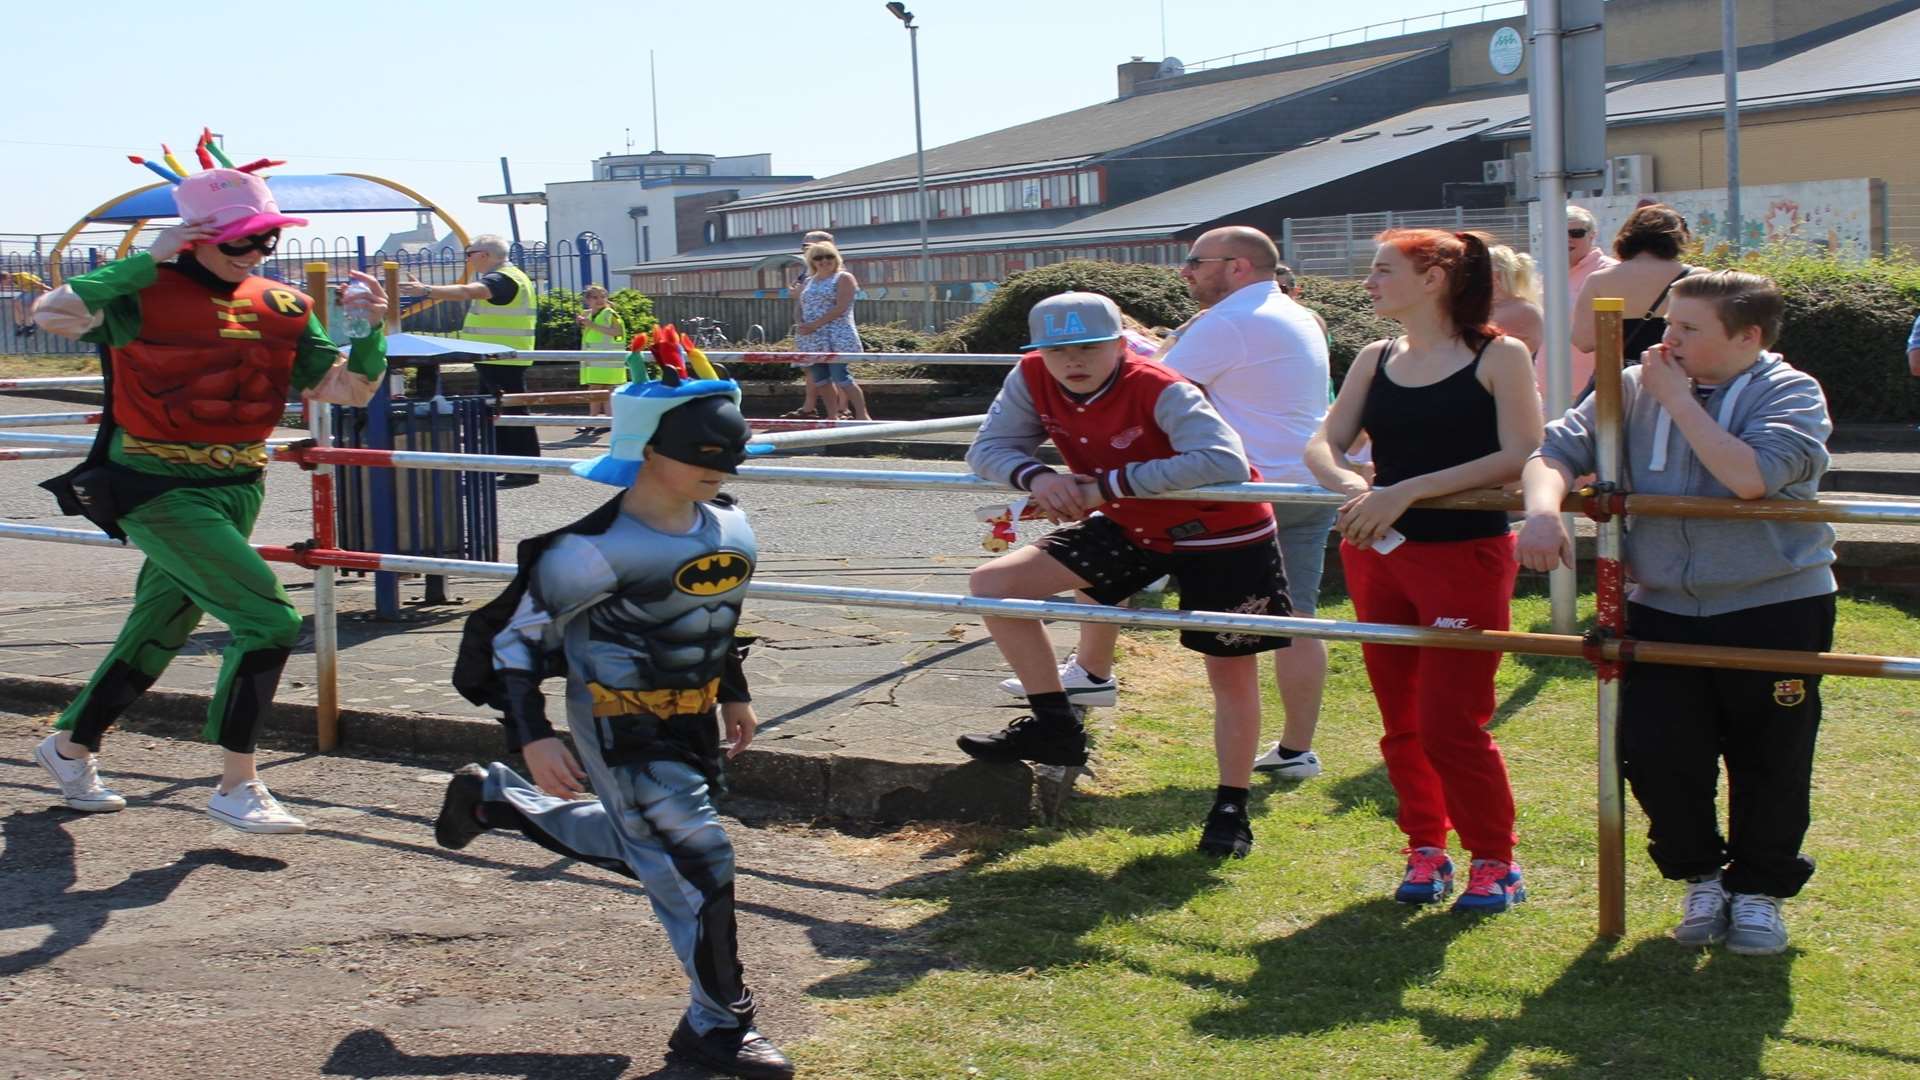 Expect to see super heroes like this arriving at Beachfields, Sheerness